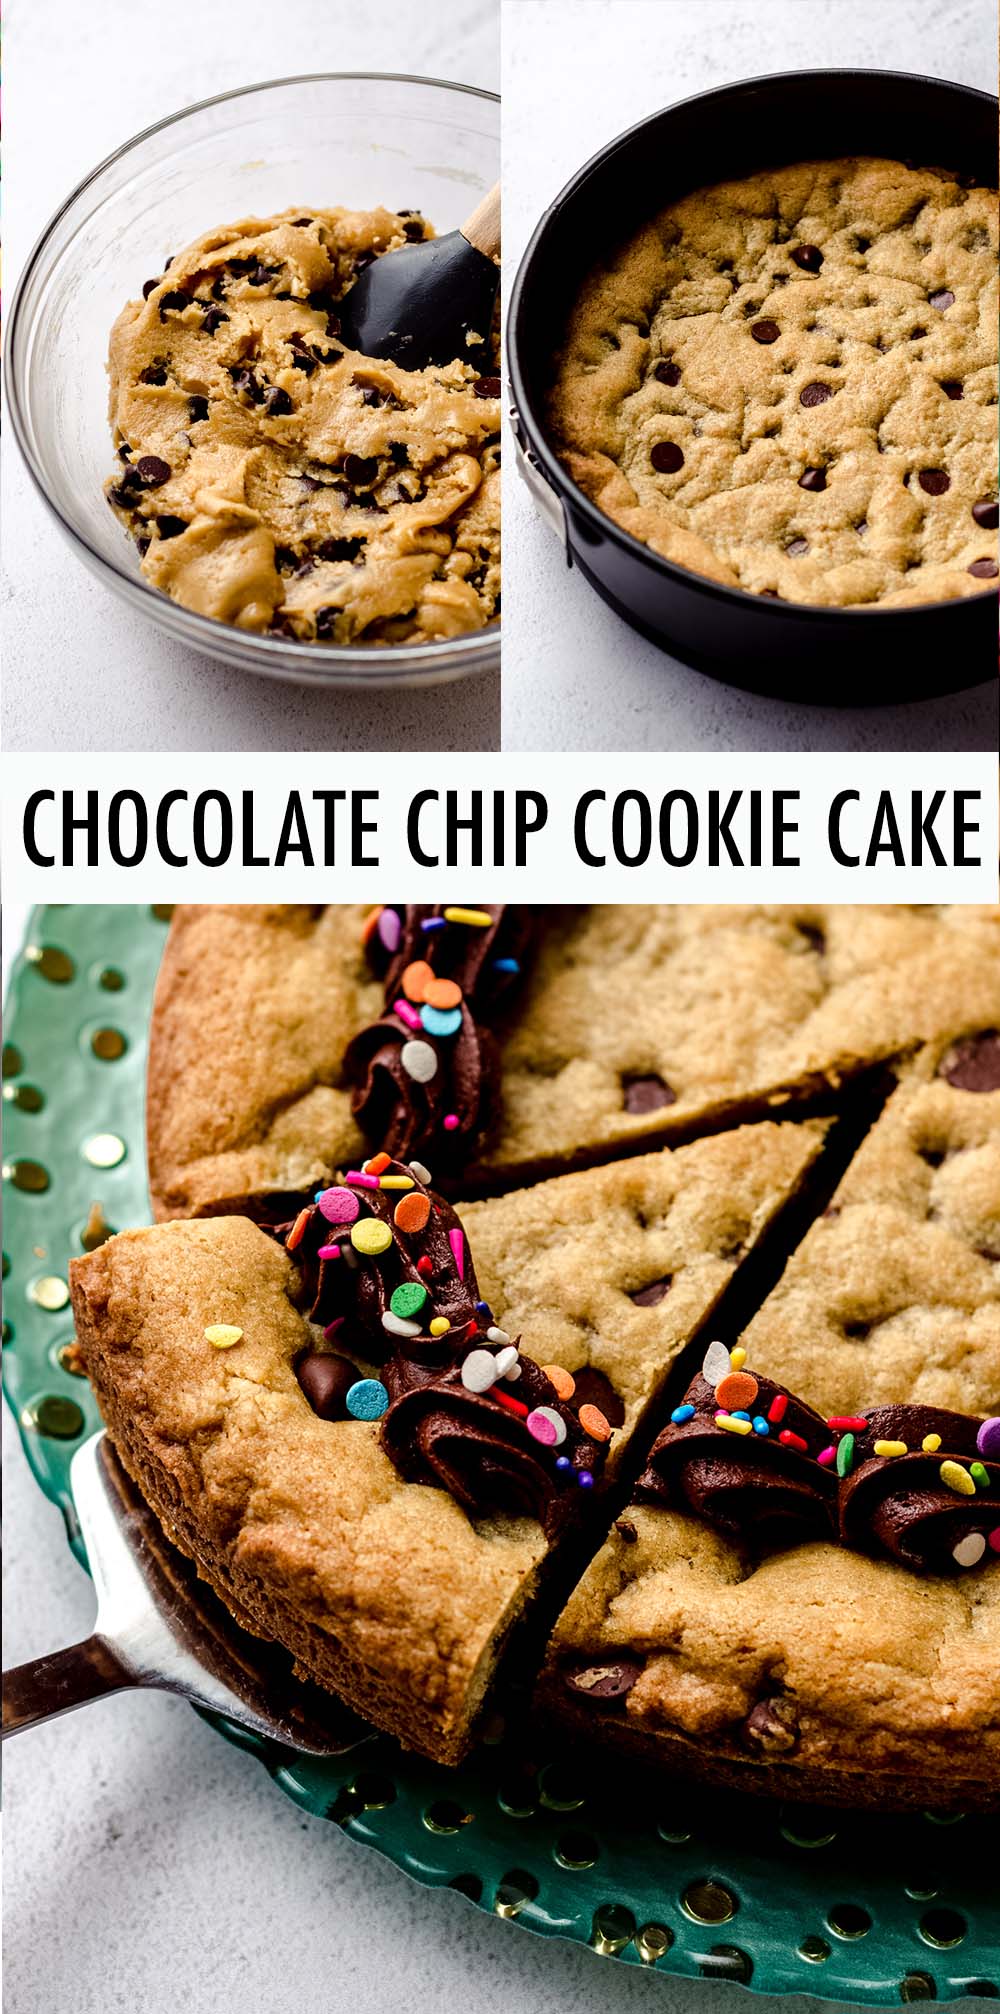 This giant chocolate chip cookie cake is the best way to eat a chocolate chip cookie! Soft in the center, chewy on the edges, and the perfect canvas for decorating for any special occasion. via @frshaprilflours